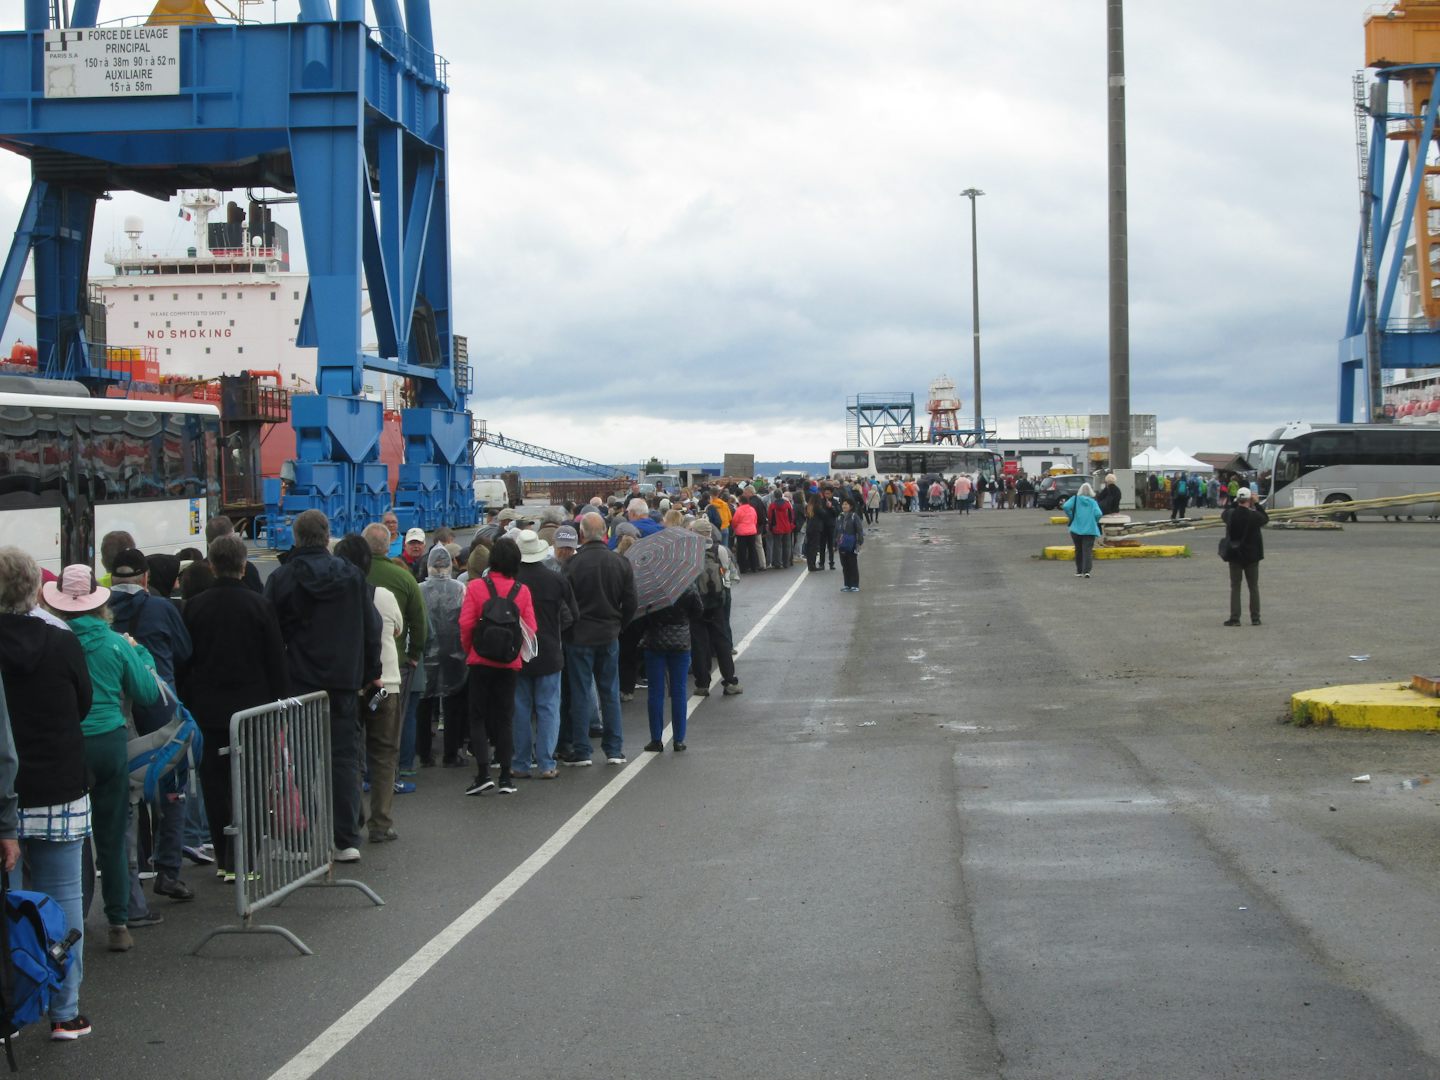 2 hour line to embark in Brest.   No seats, no toilets and no refreshments.